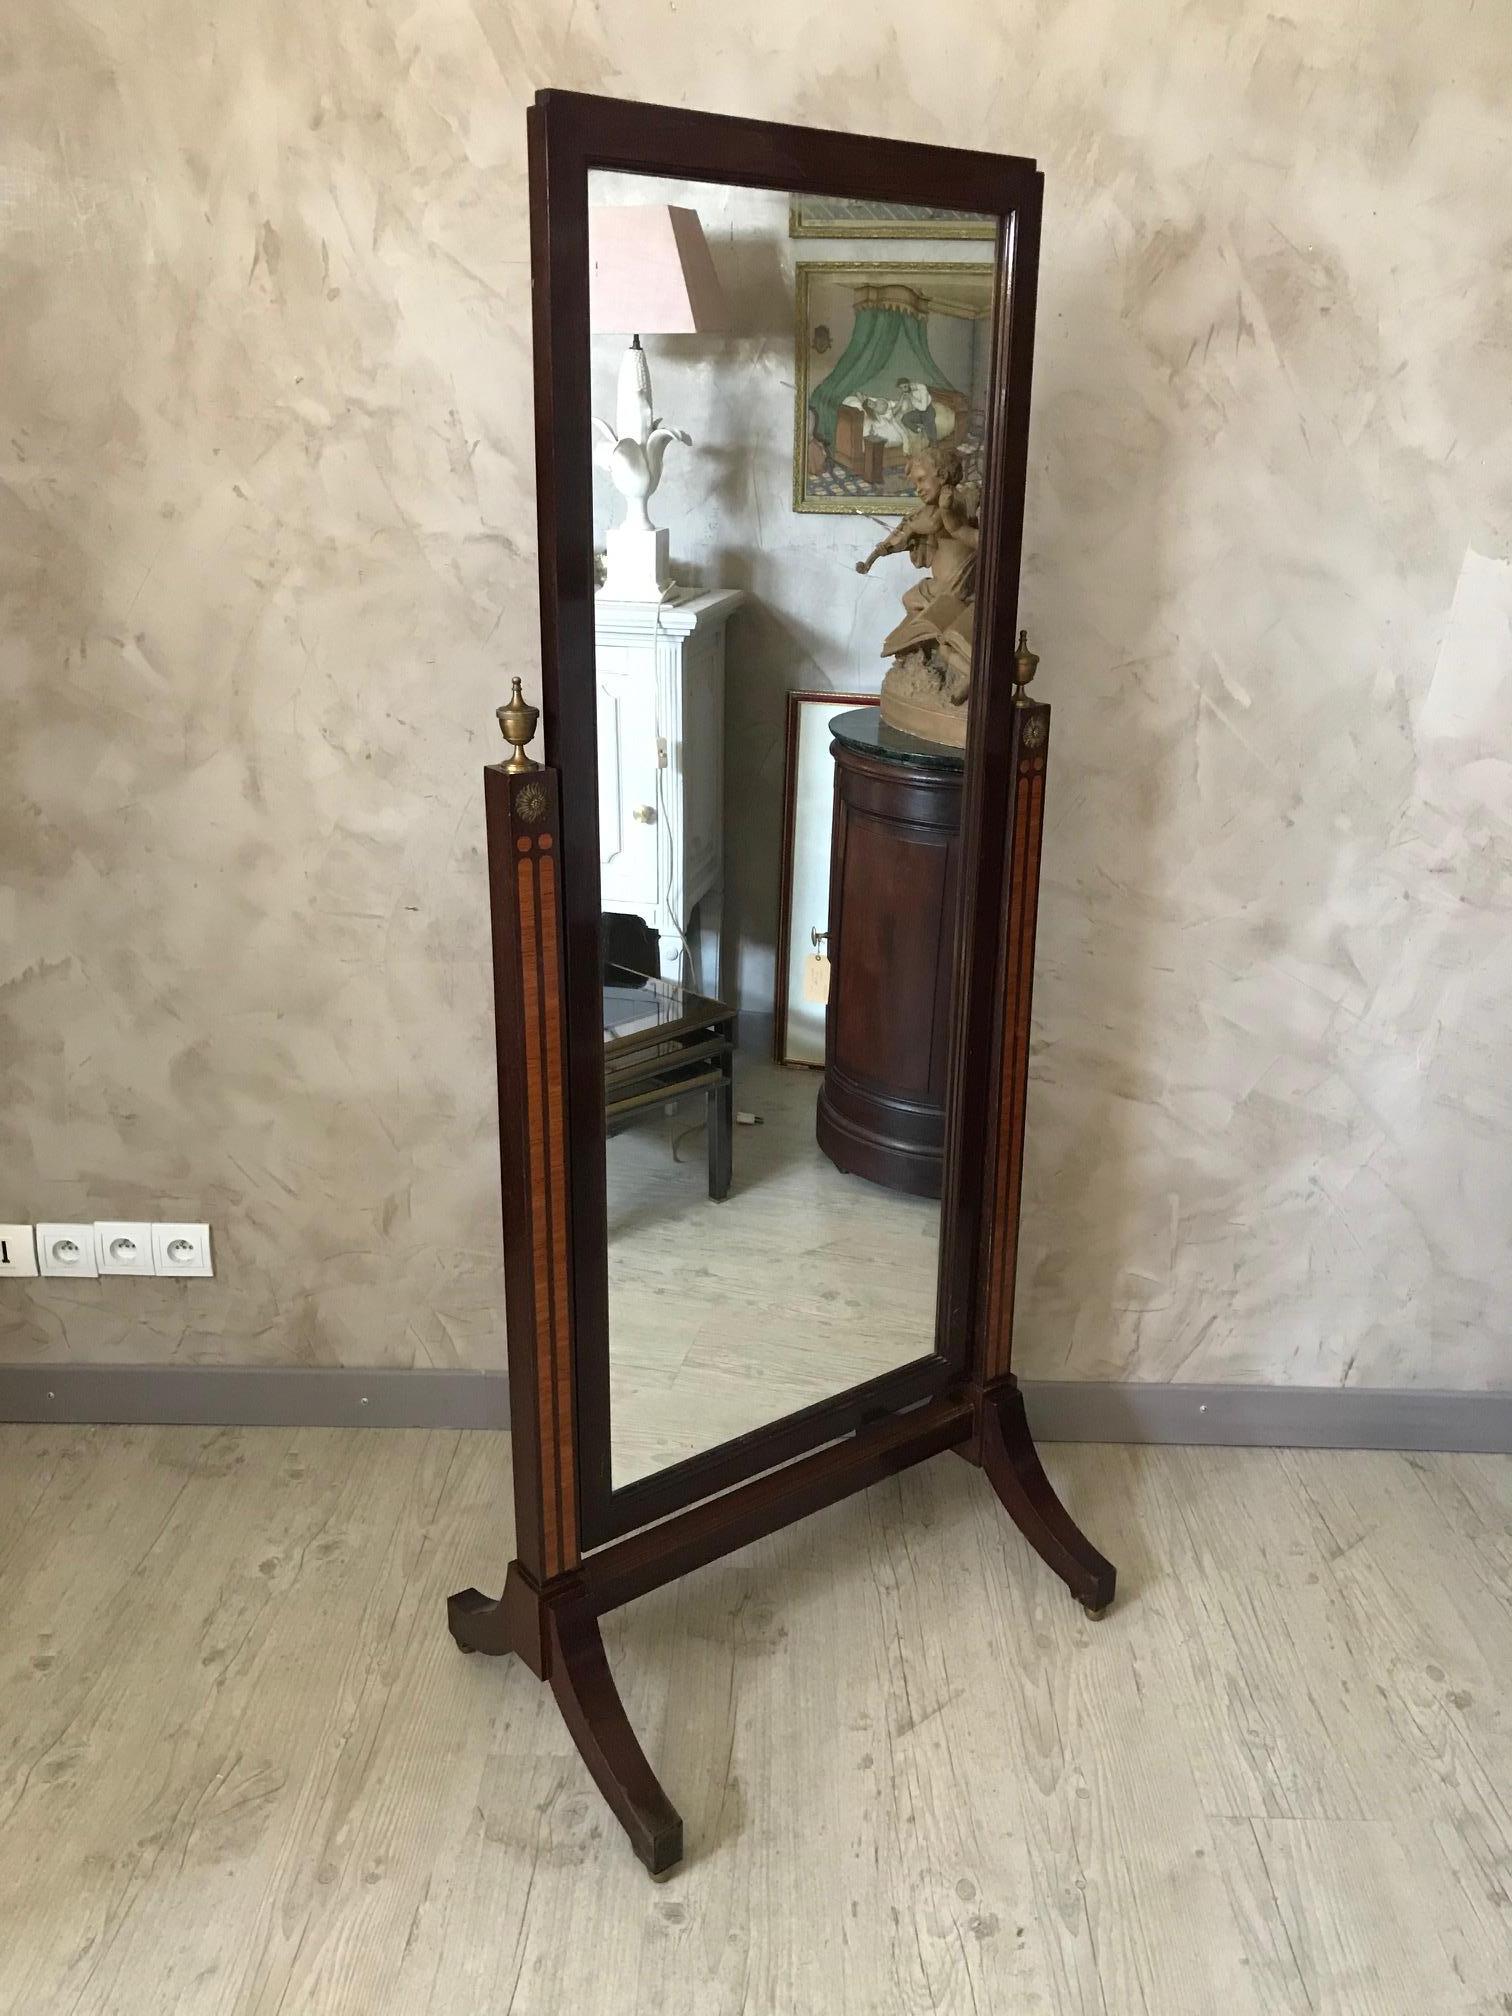 Very nice early 20th century French Empire style psyche from the 1900s. 
Large removable mirror adjustable thanks to two screw at the back.
Nice marquetry on the front. Full length mirror. 
Beautiful quality.